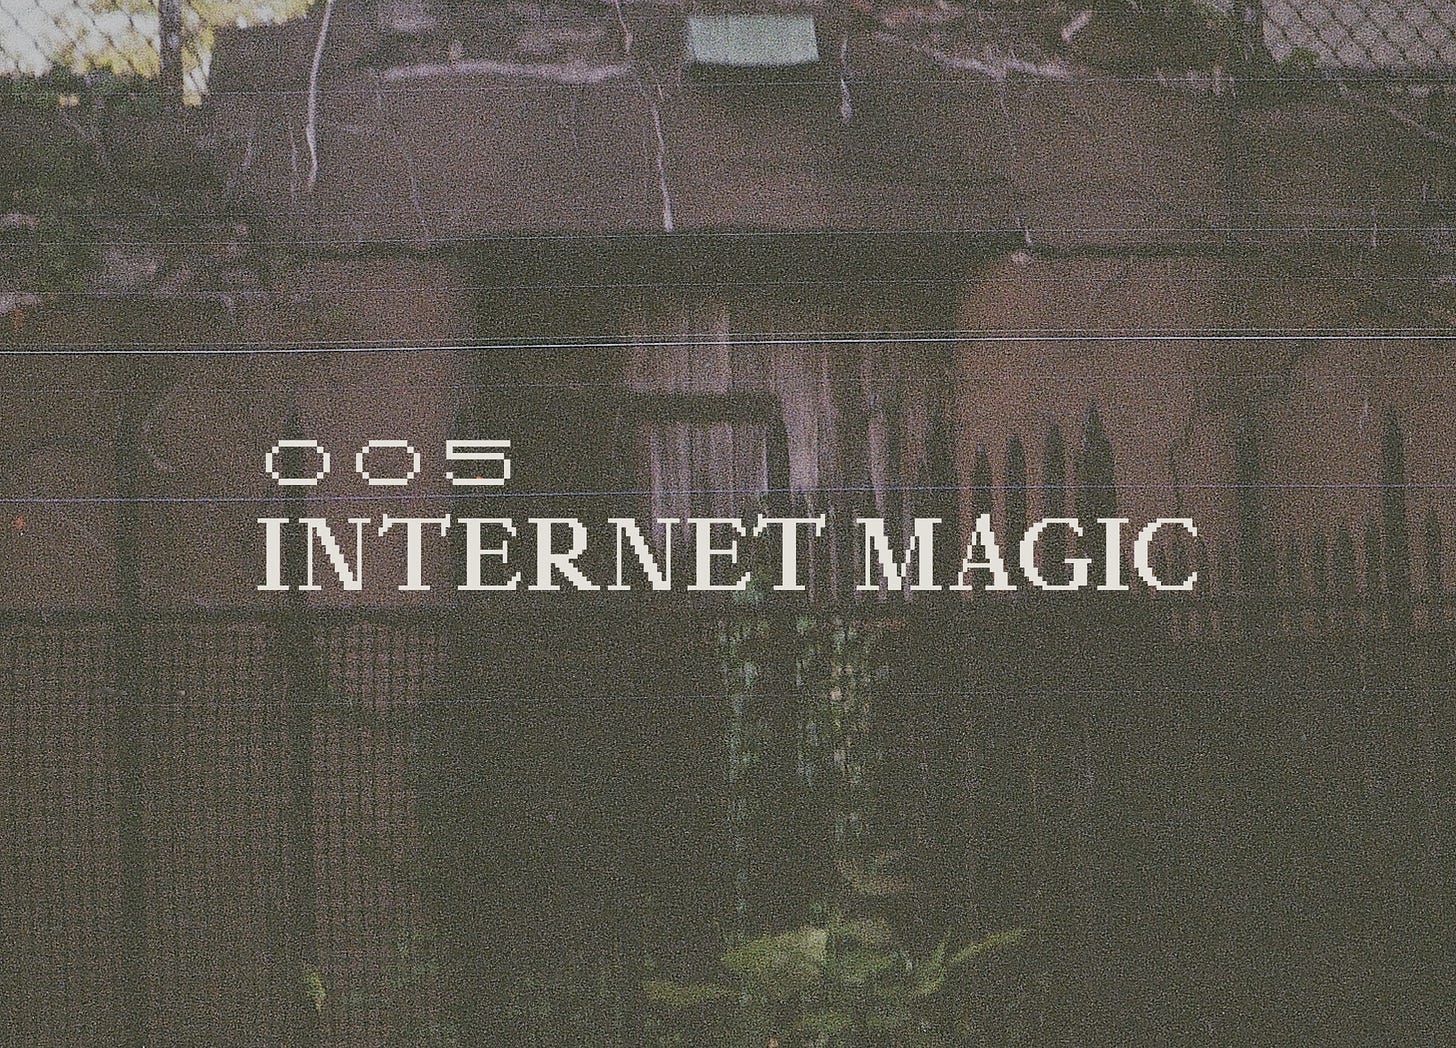 Overgrown iron gate in front of a brown building. Distorted film quality, reads "005 Internet Magic" in a pixelated serif font.